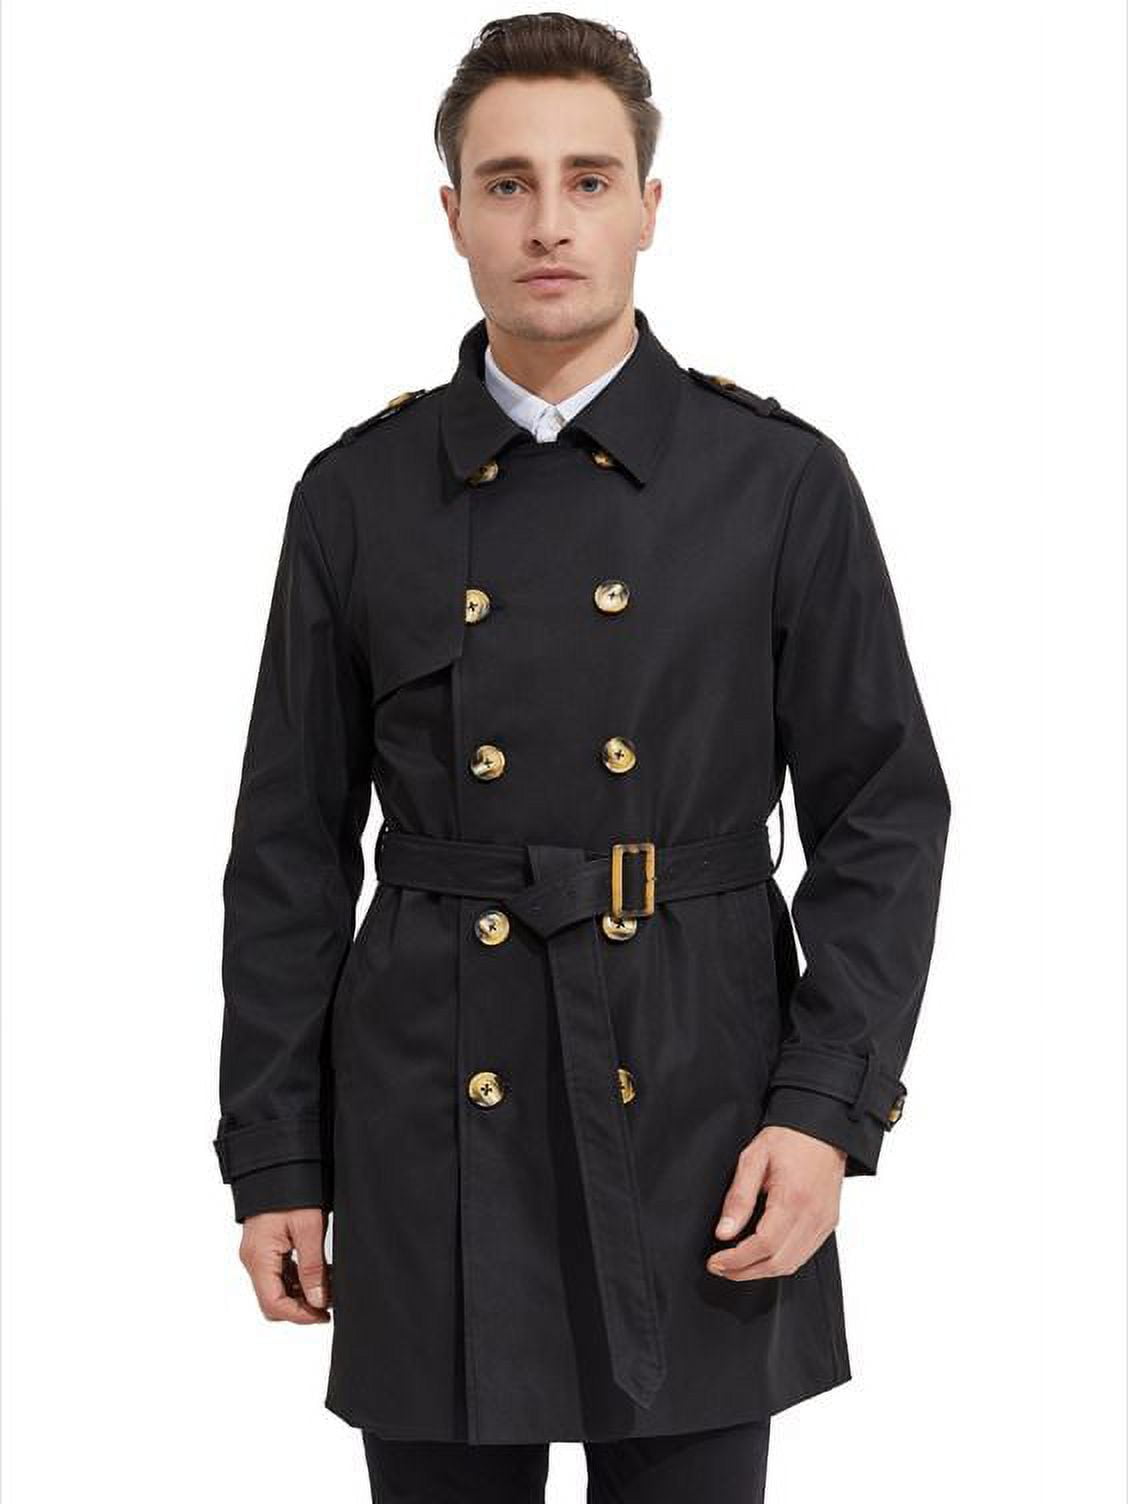 Orolay Men's Double Breasted Trench Coat with Removable Belt,Black,L ...